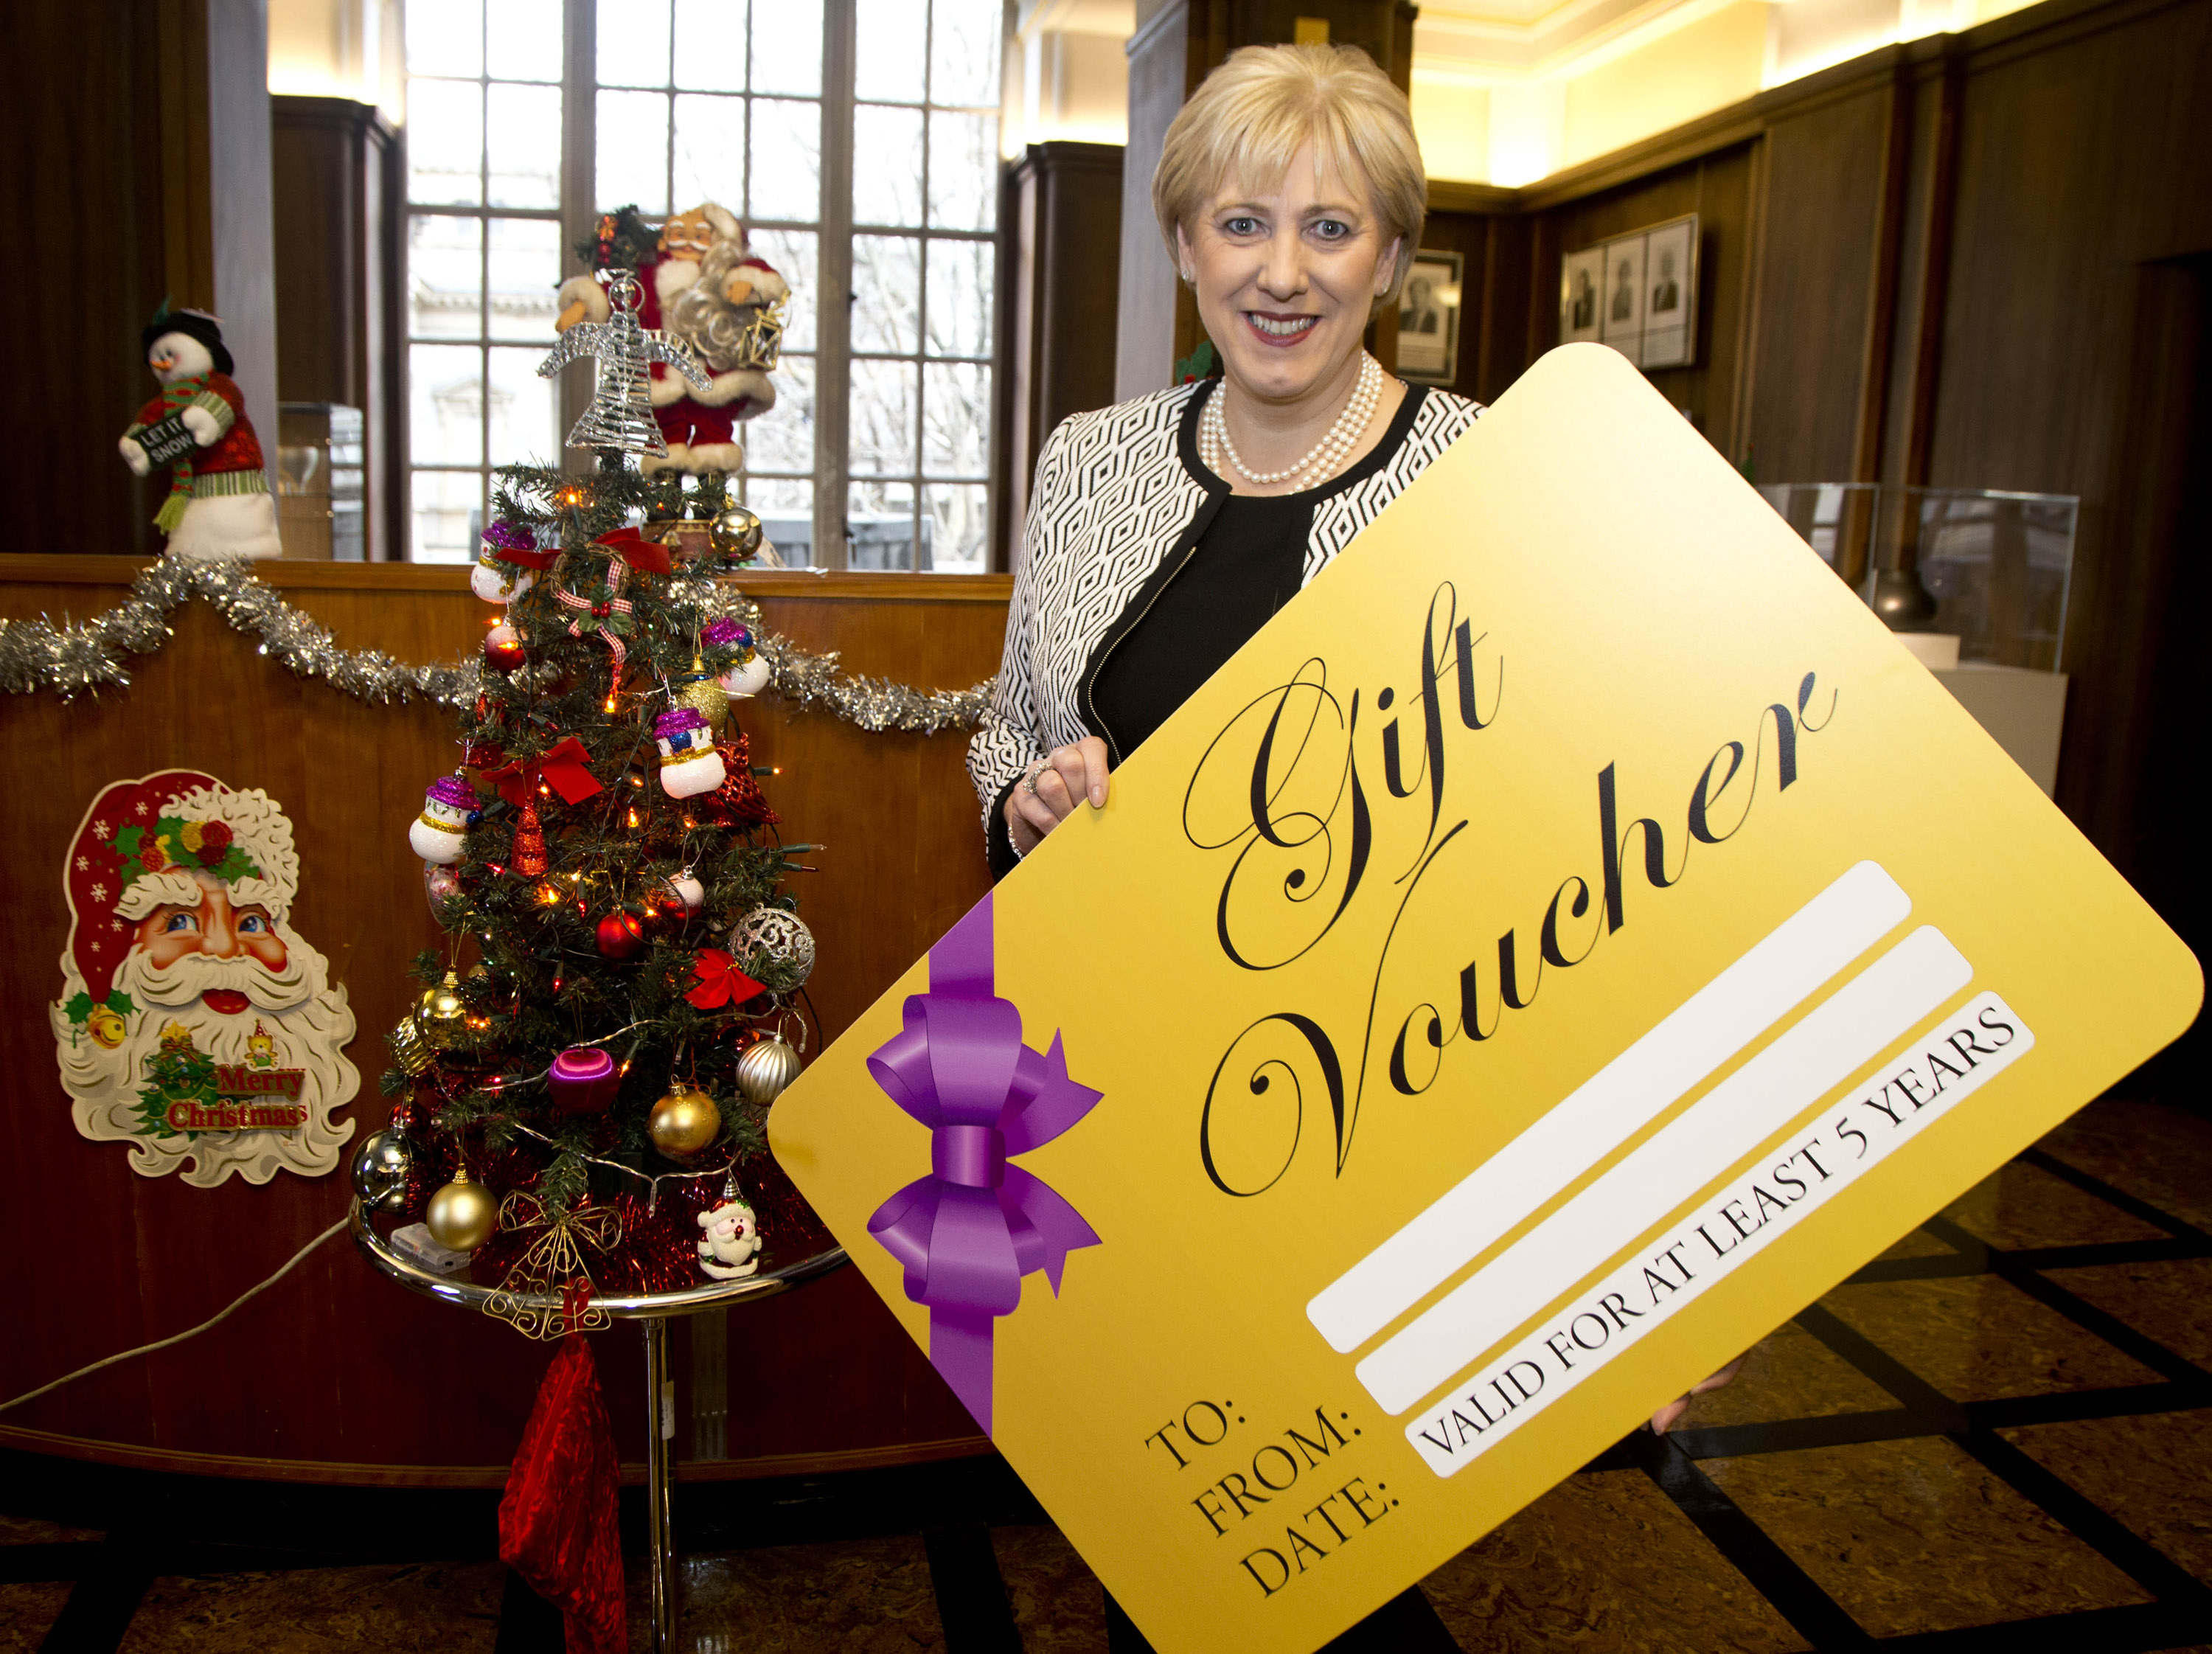 Minister Humphreys secures Cabinet approval for legislation to put a 5-year minimum expiry date on gift vouchers